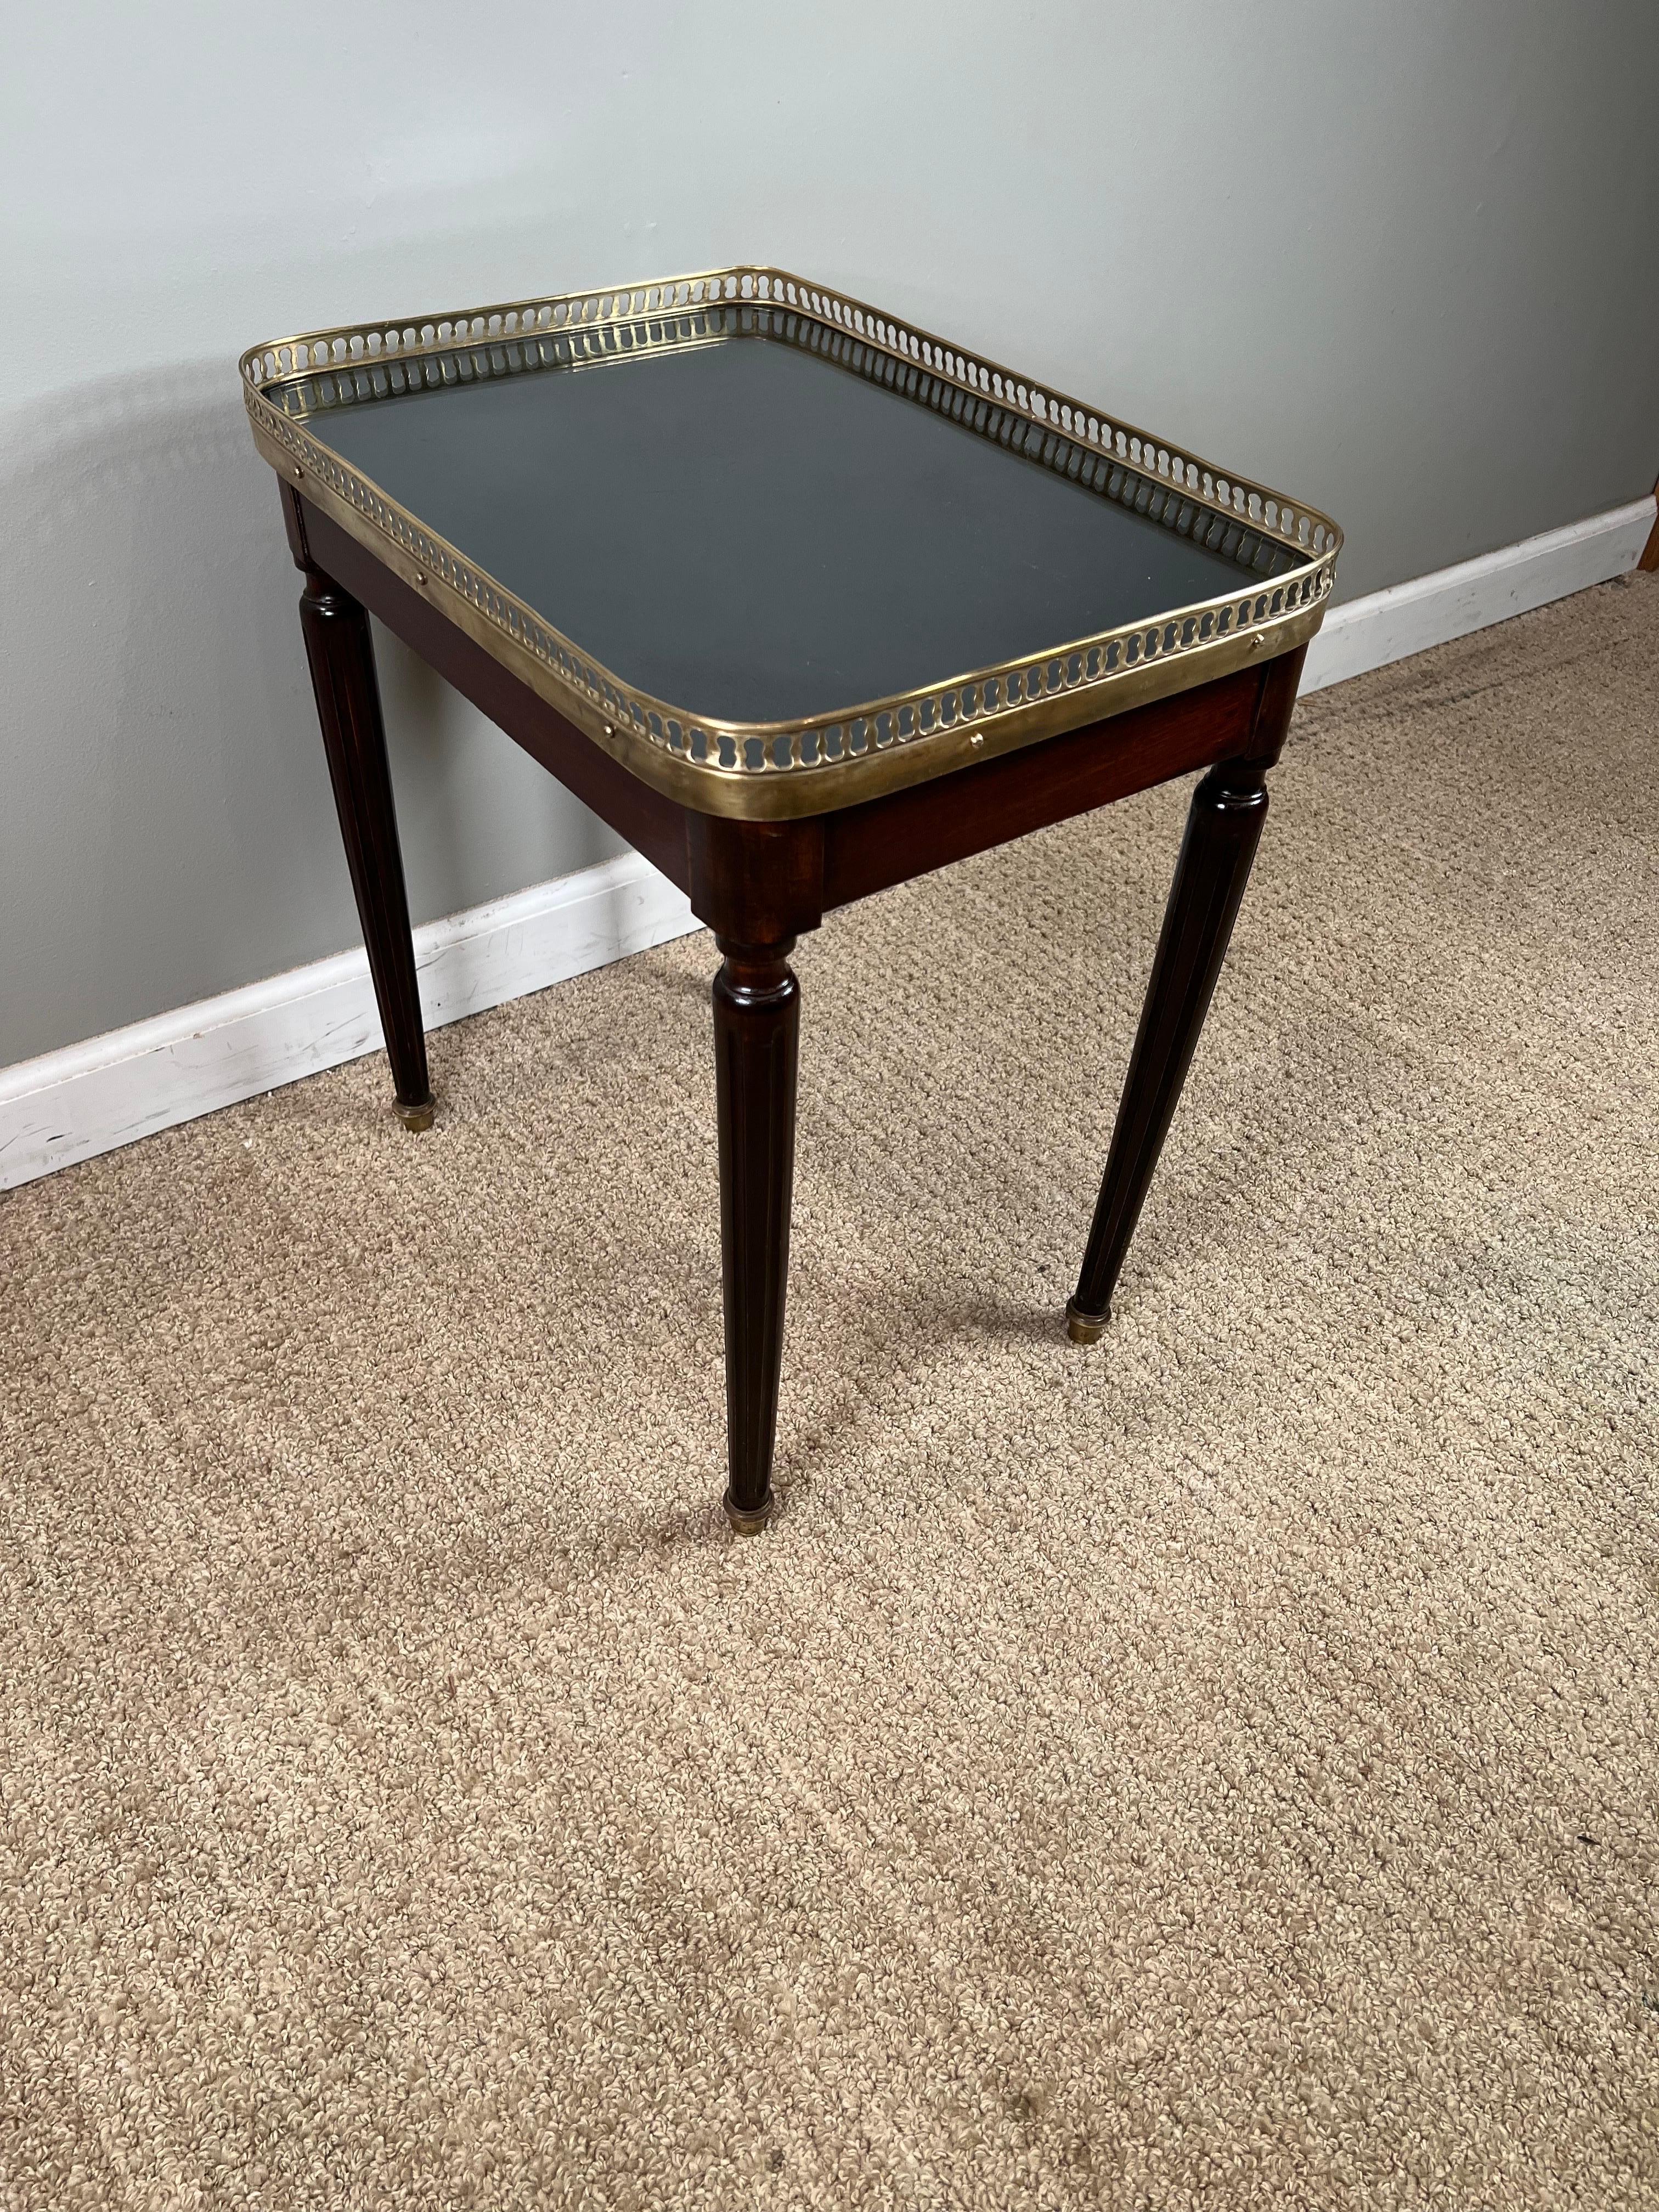 Polished Louis XVI Style Mirror Top Table with Gallery  For Sale